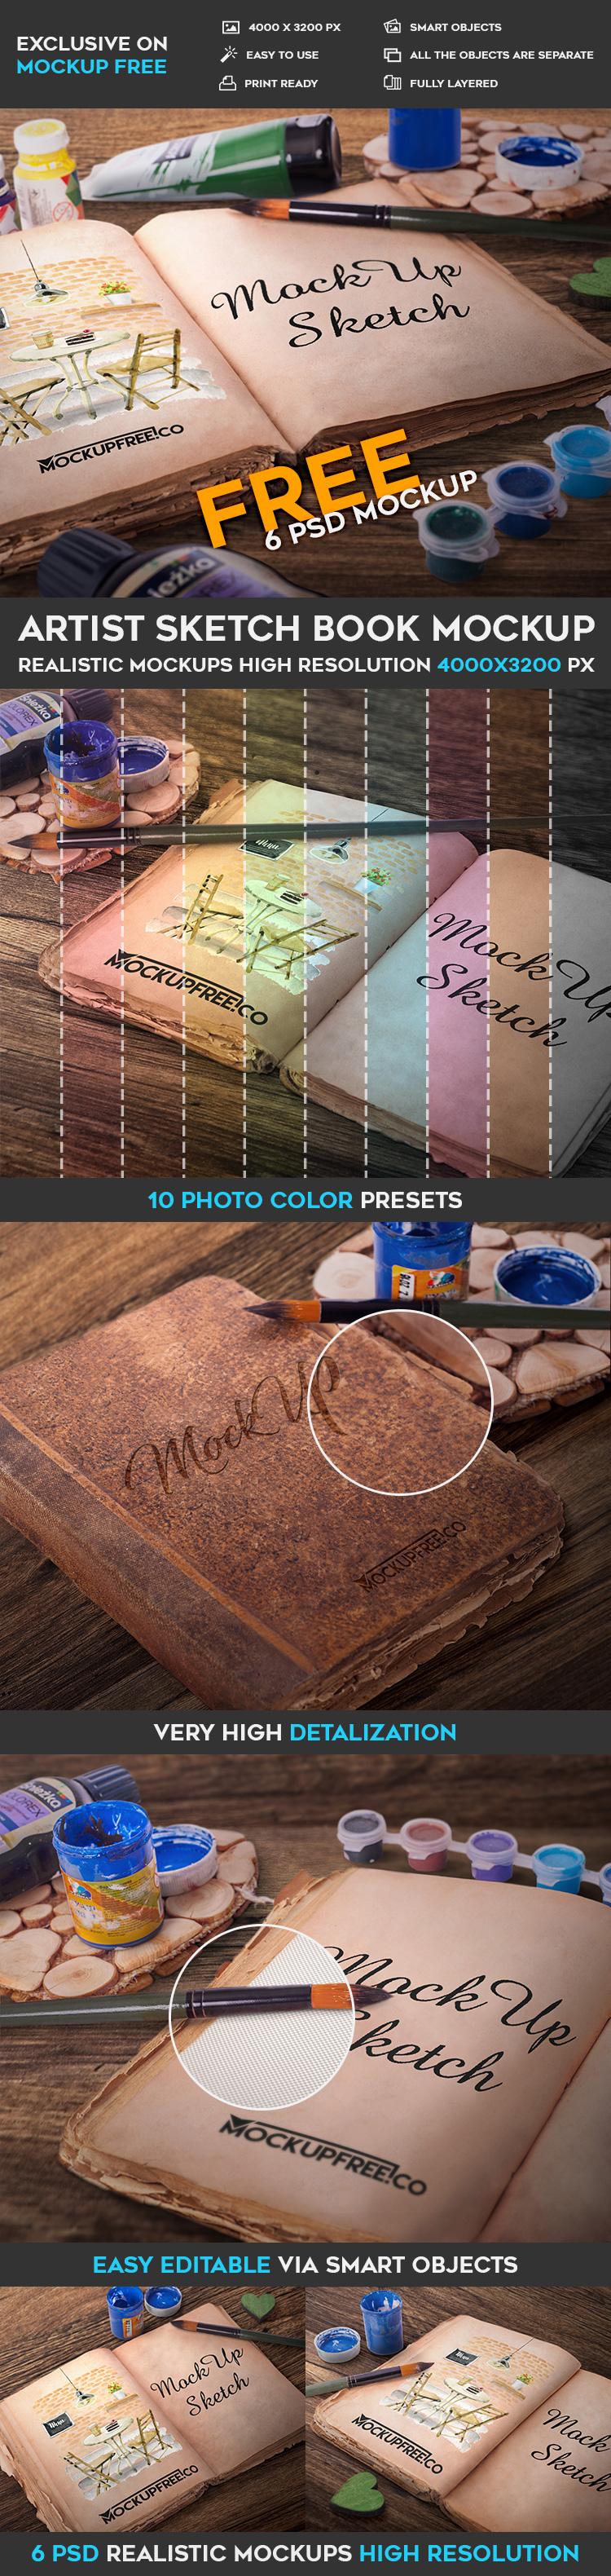 book paints sketch brush artist antiquity Mockup free product mockups